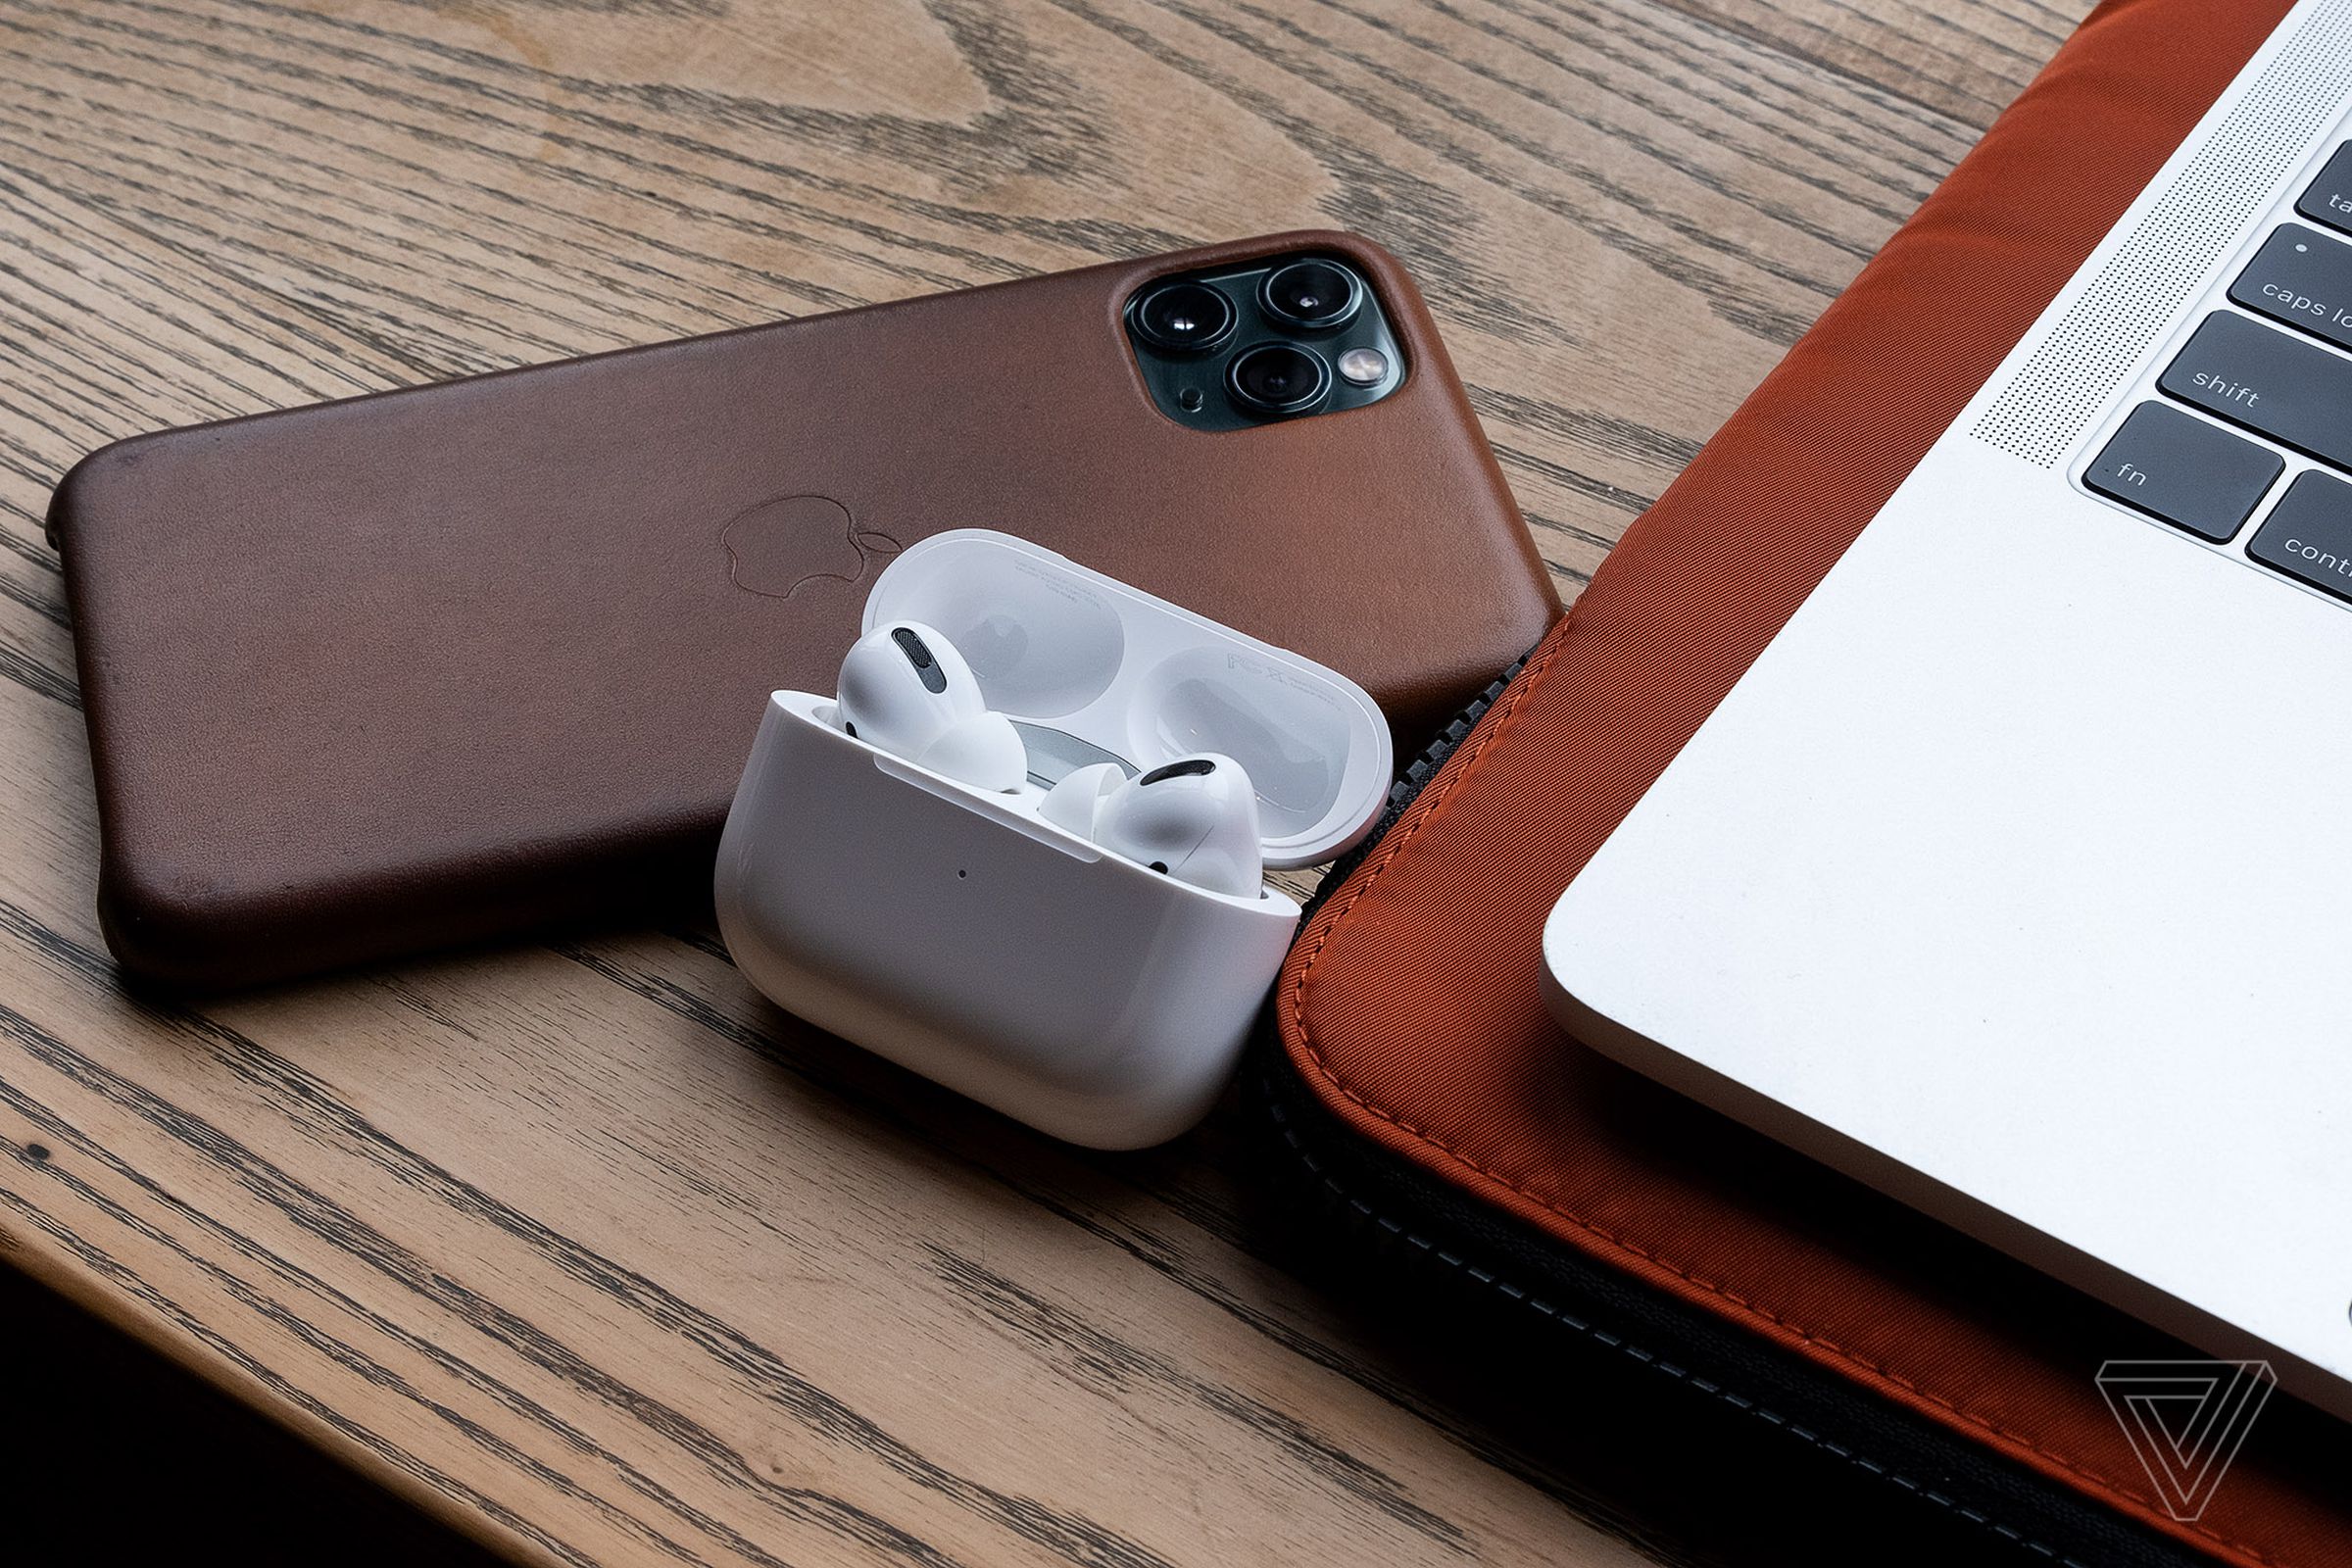 The last-gen AirPods Pro sitting on a desk near an iPhone and a MacBook.